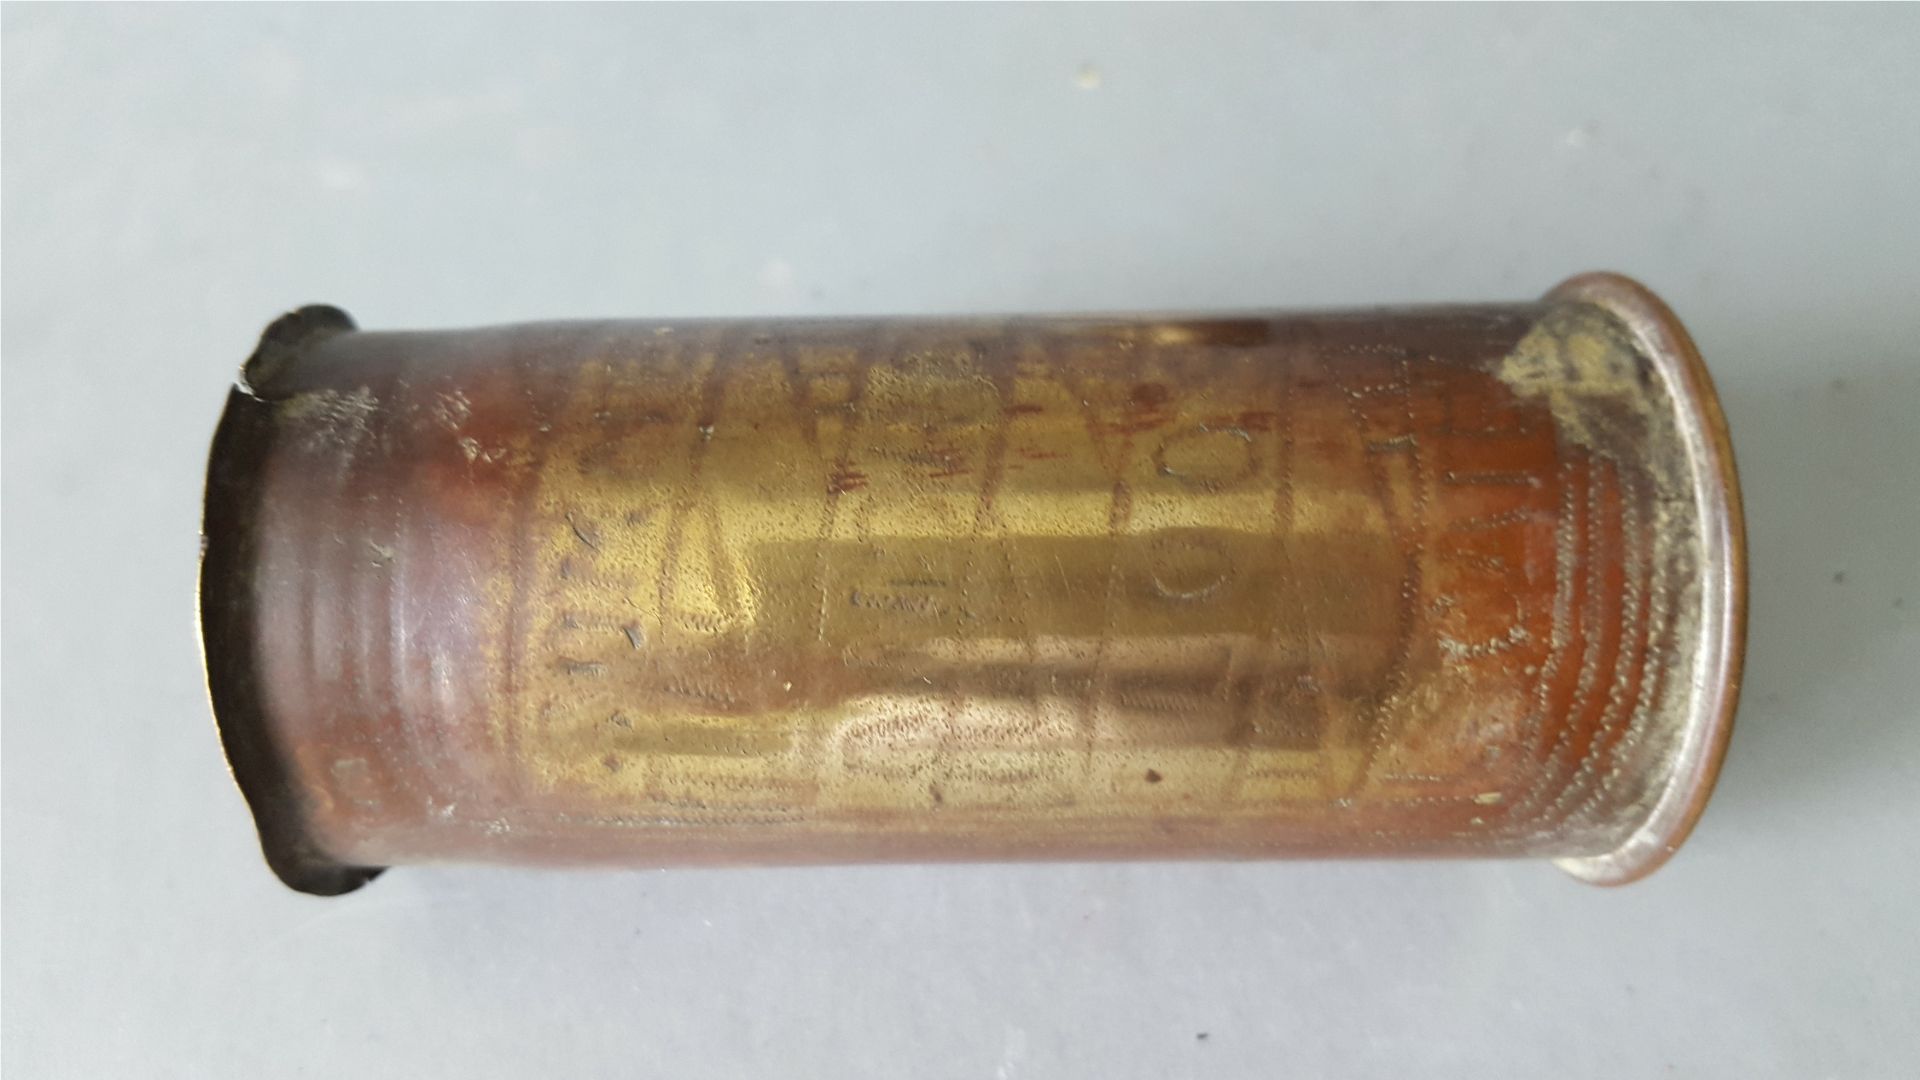 Trench Art Sell Casings German Karlsruhe 37mm Shells. Inscribed A W Potts & A H Potts. These laos - Image 3 of 6